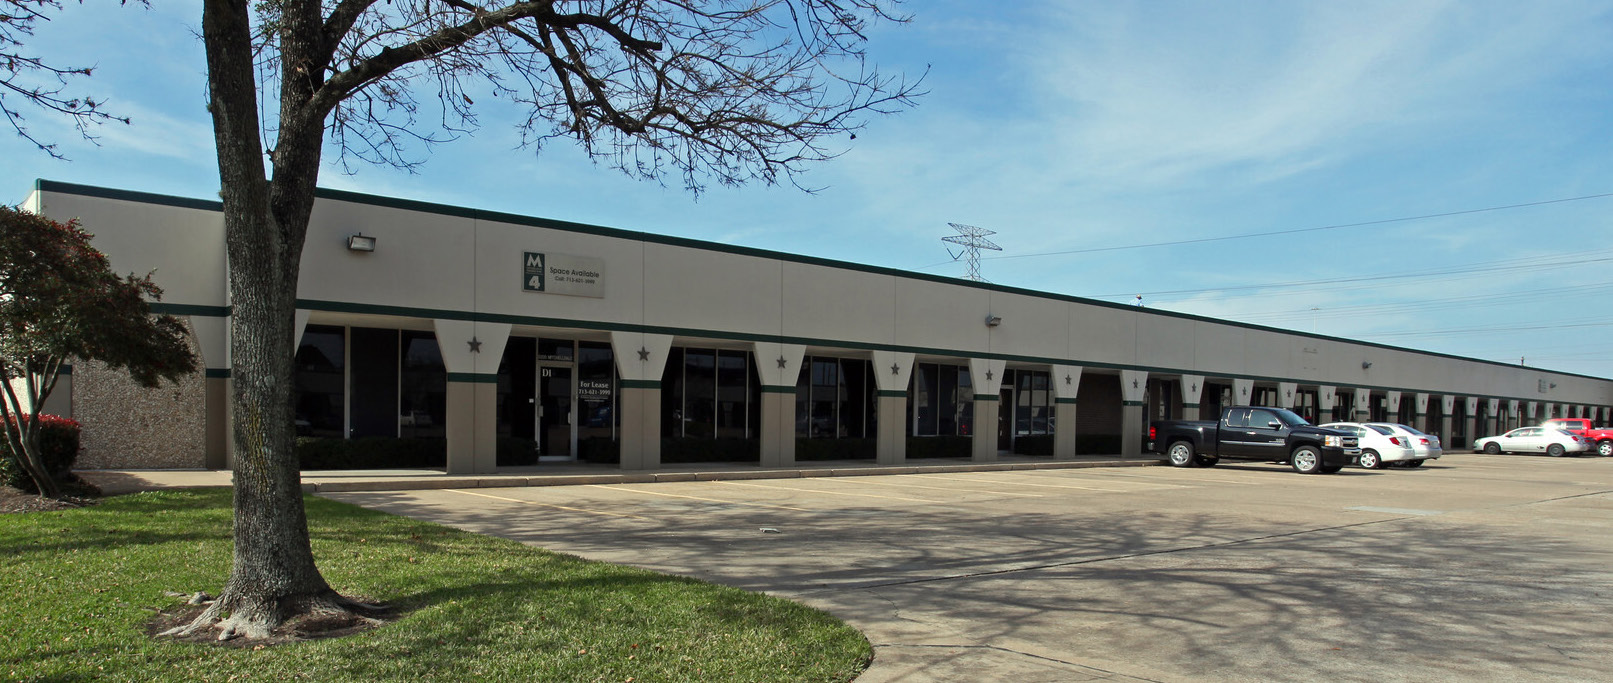 Partners Capital acquires 377,752-sq.-ft flex industrial property on 25 acres in Houston